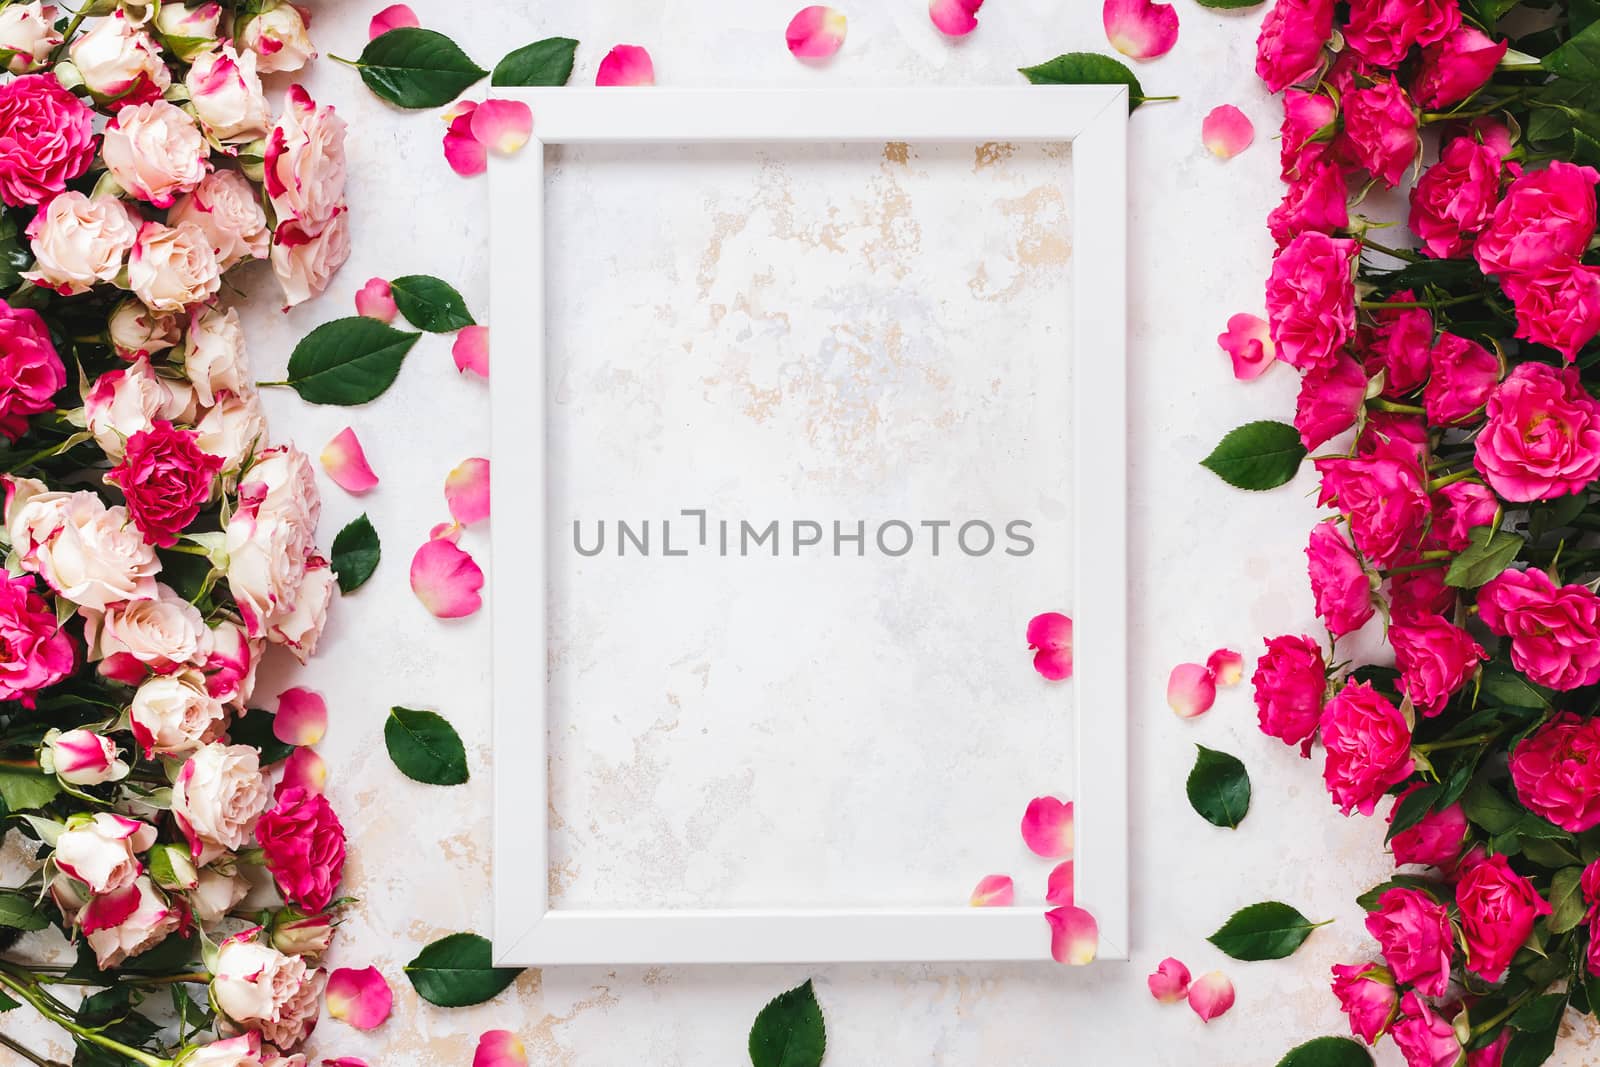 Various brightly colored pink and red roses directed at each other on rustic white and gold surface and empty white wooden frame.  Top view, blank space